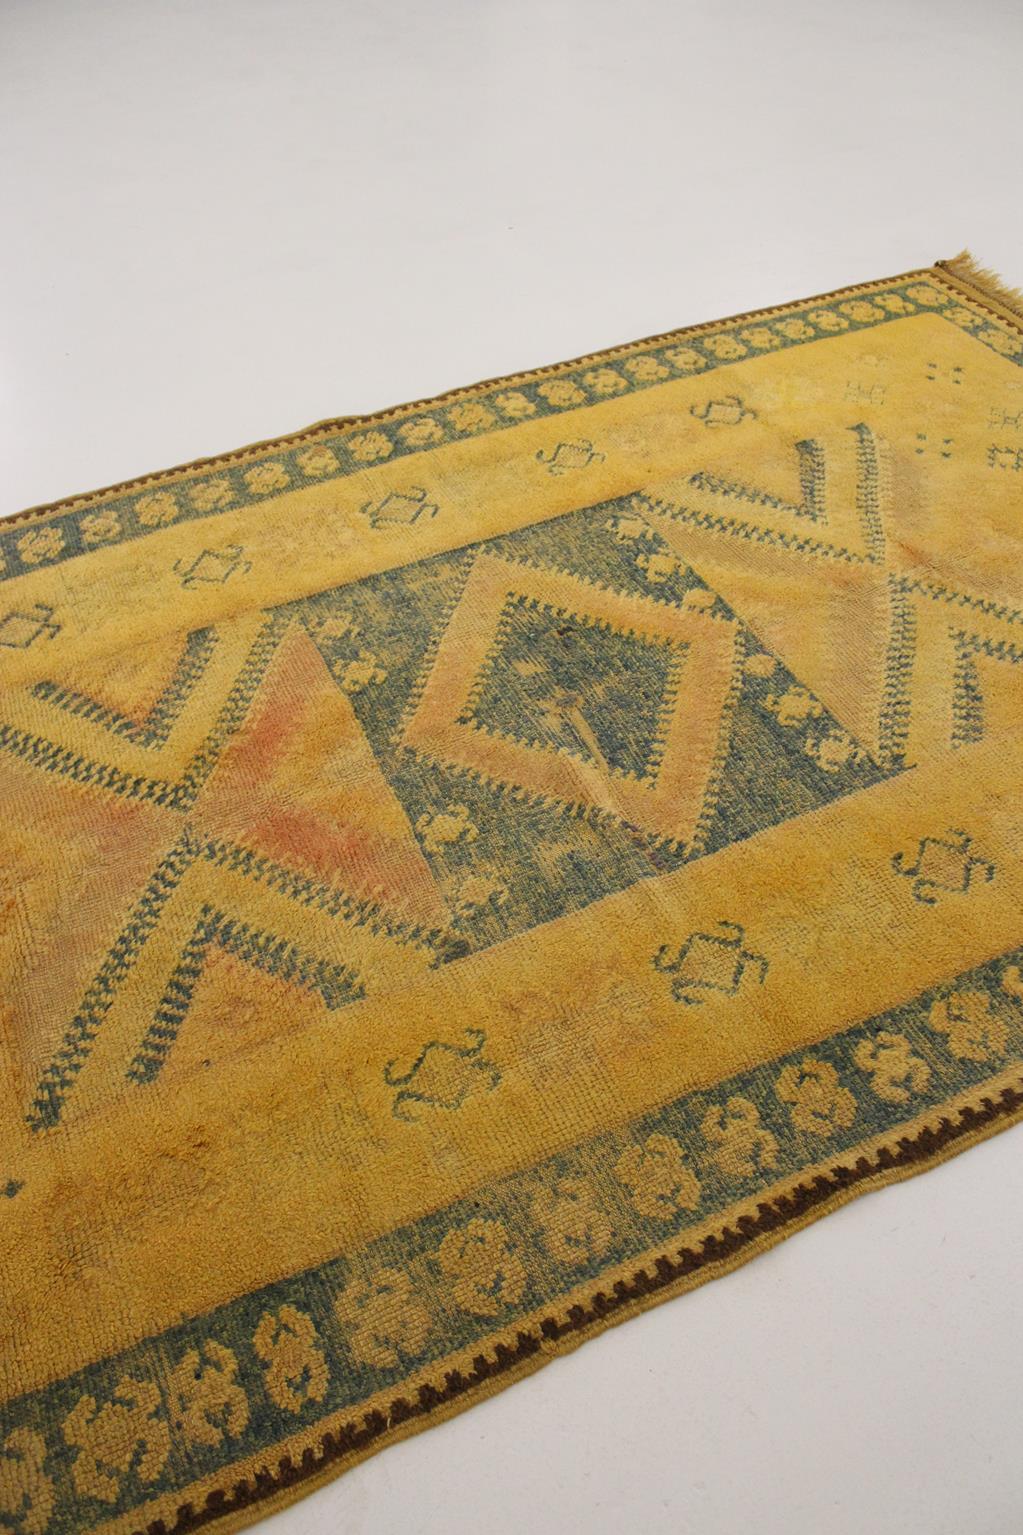 Vintage Moroccan Taznakht rug - Yellow/blue - 4.3x7.6feet / 134x234cm For Sale 6